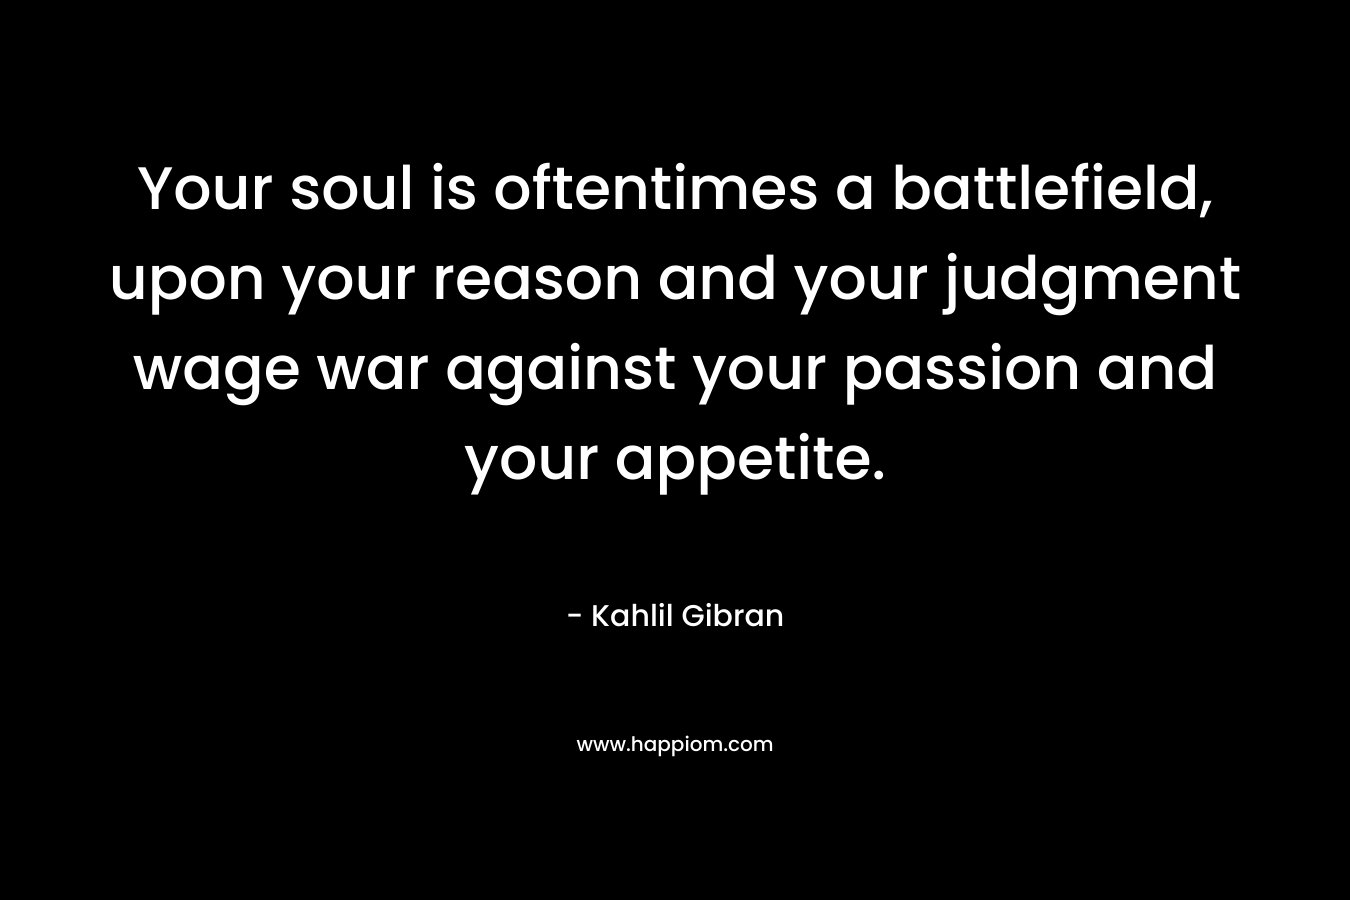 Your soul is oftentimes a battlefield, upon your reason and your judgment wage war against your passion and your appetite. – Kahlil Gibran